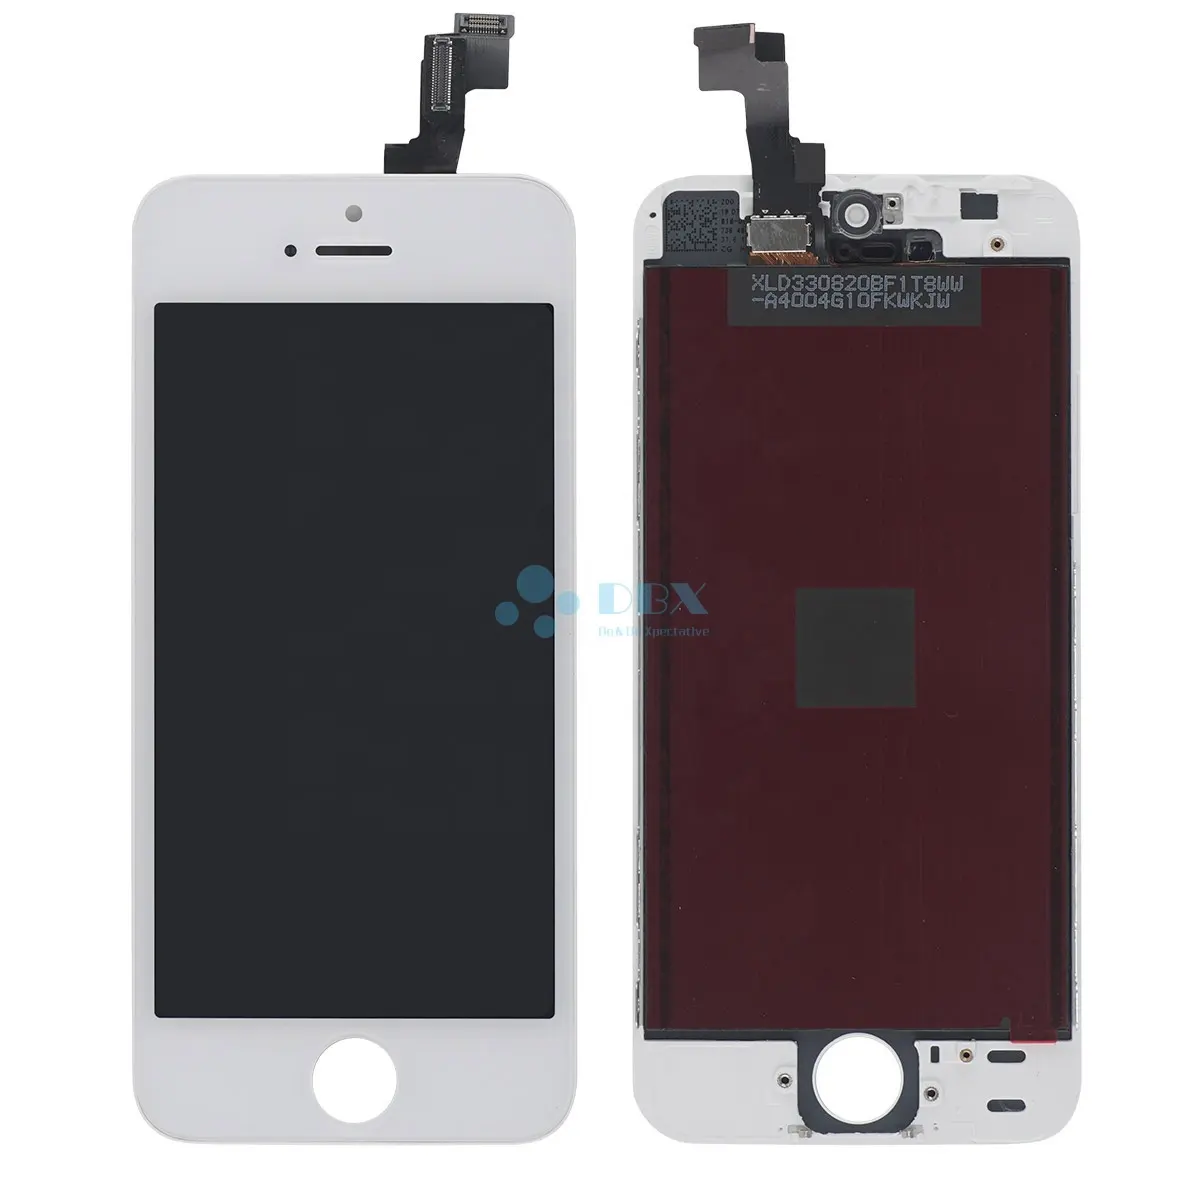 original genuine high quality lcd replacement lcd screen for iphone 5 5s 5c